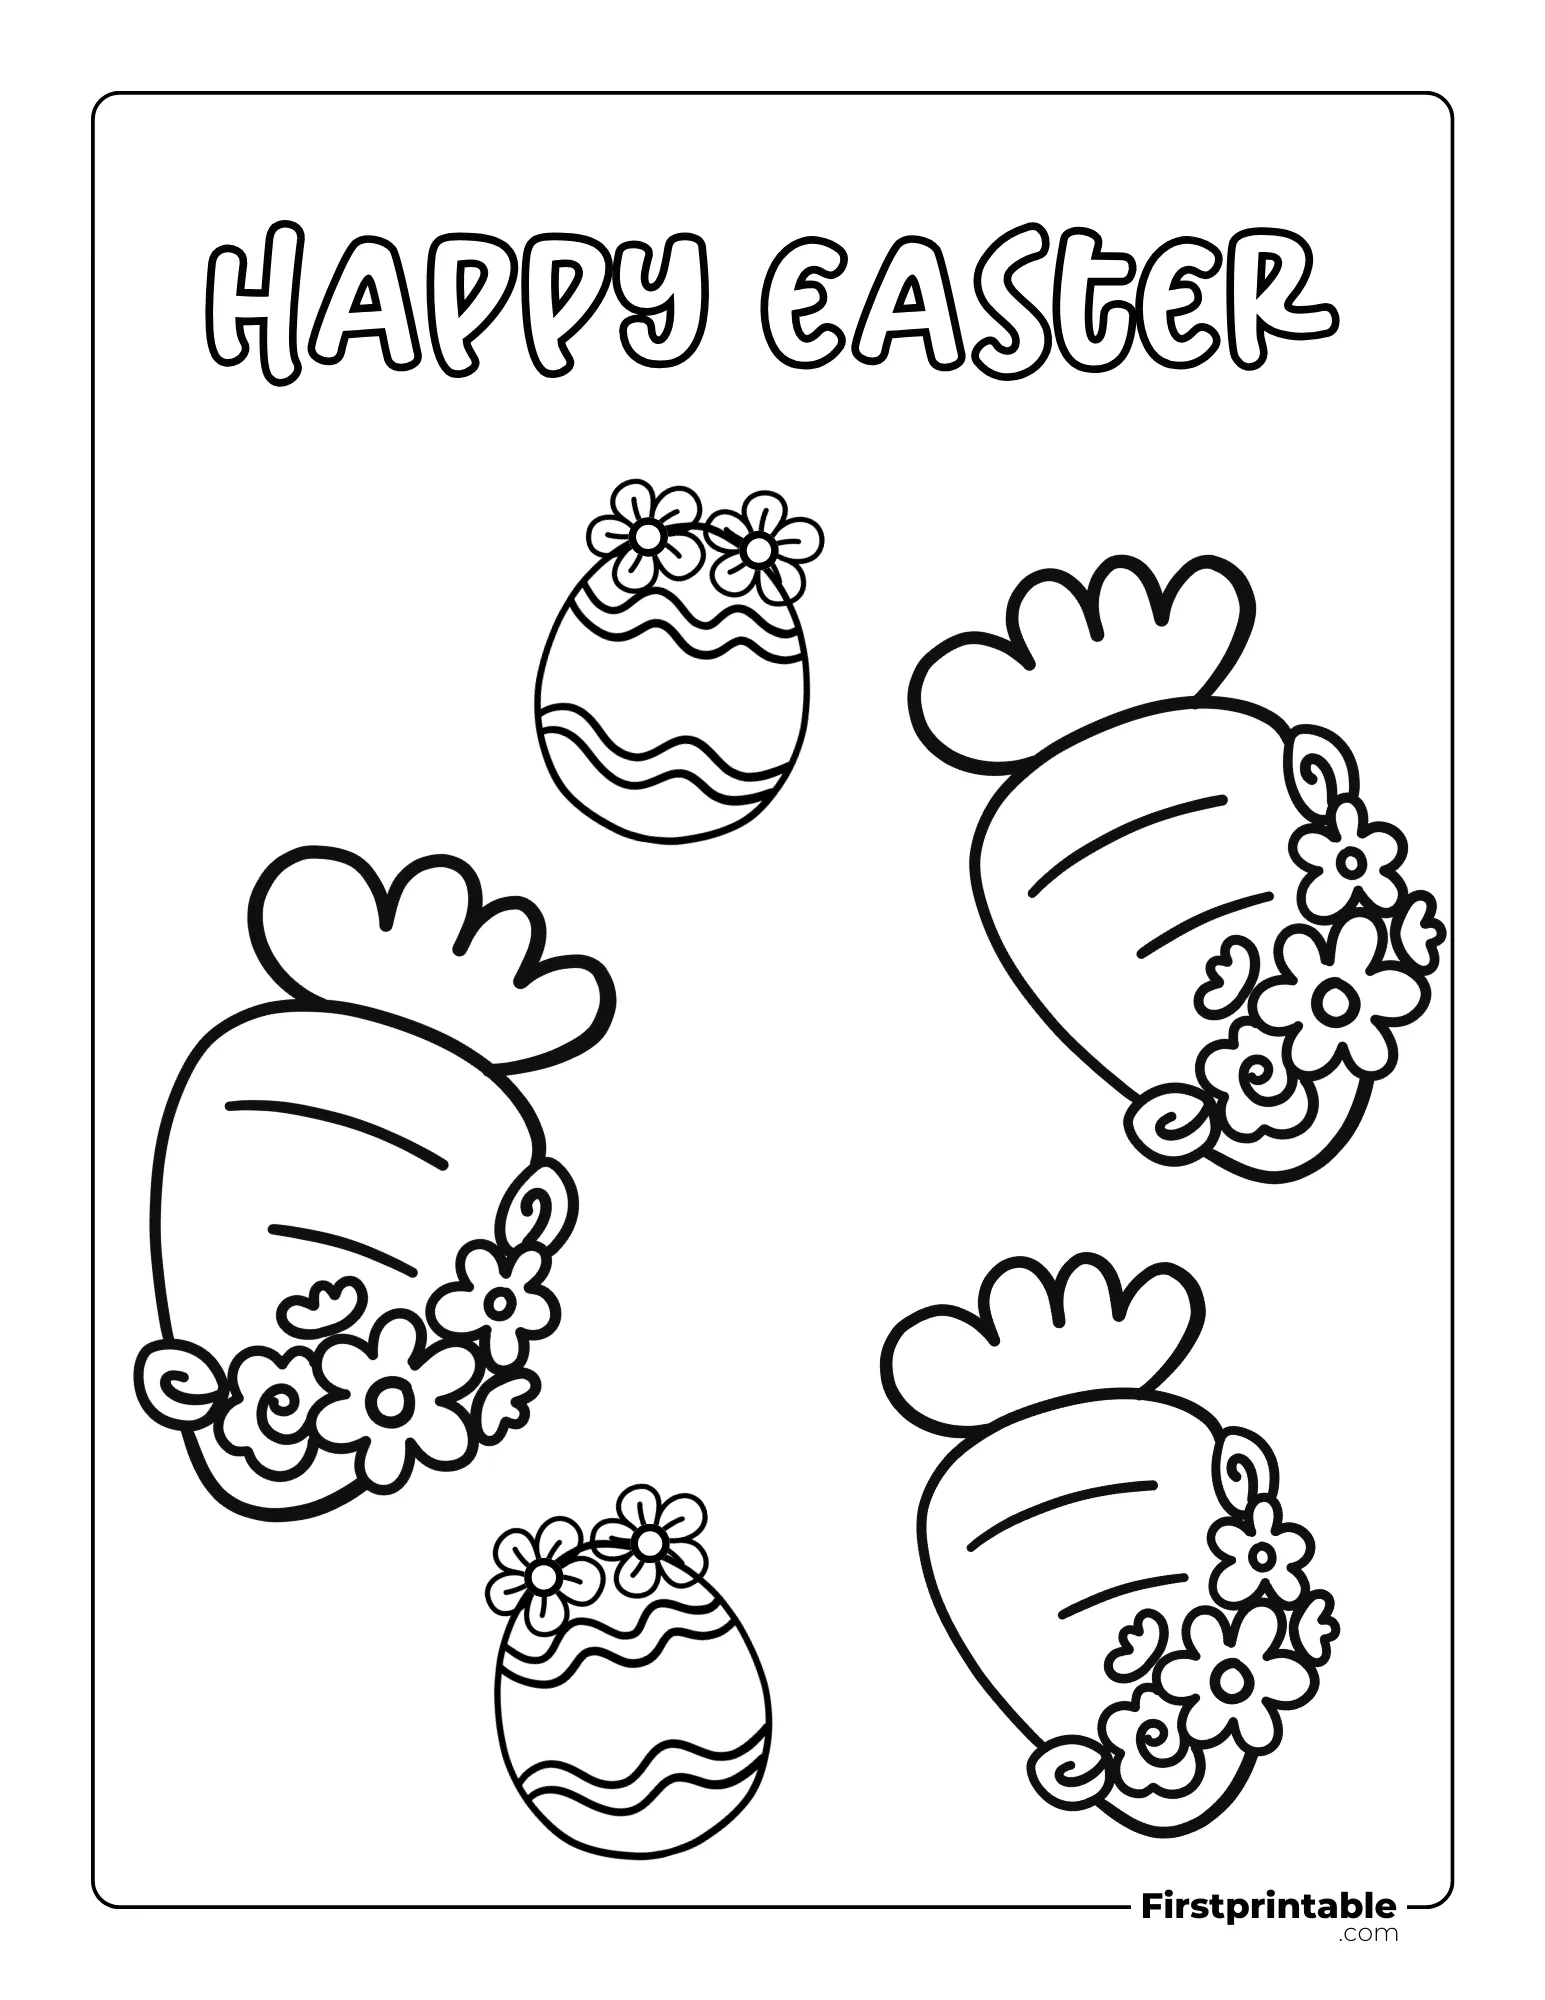 Happy Easter Egg page to color